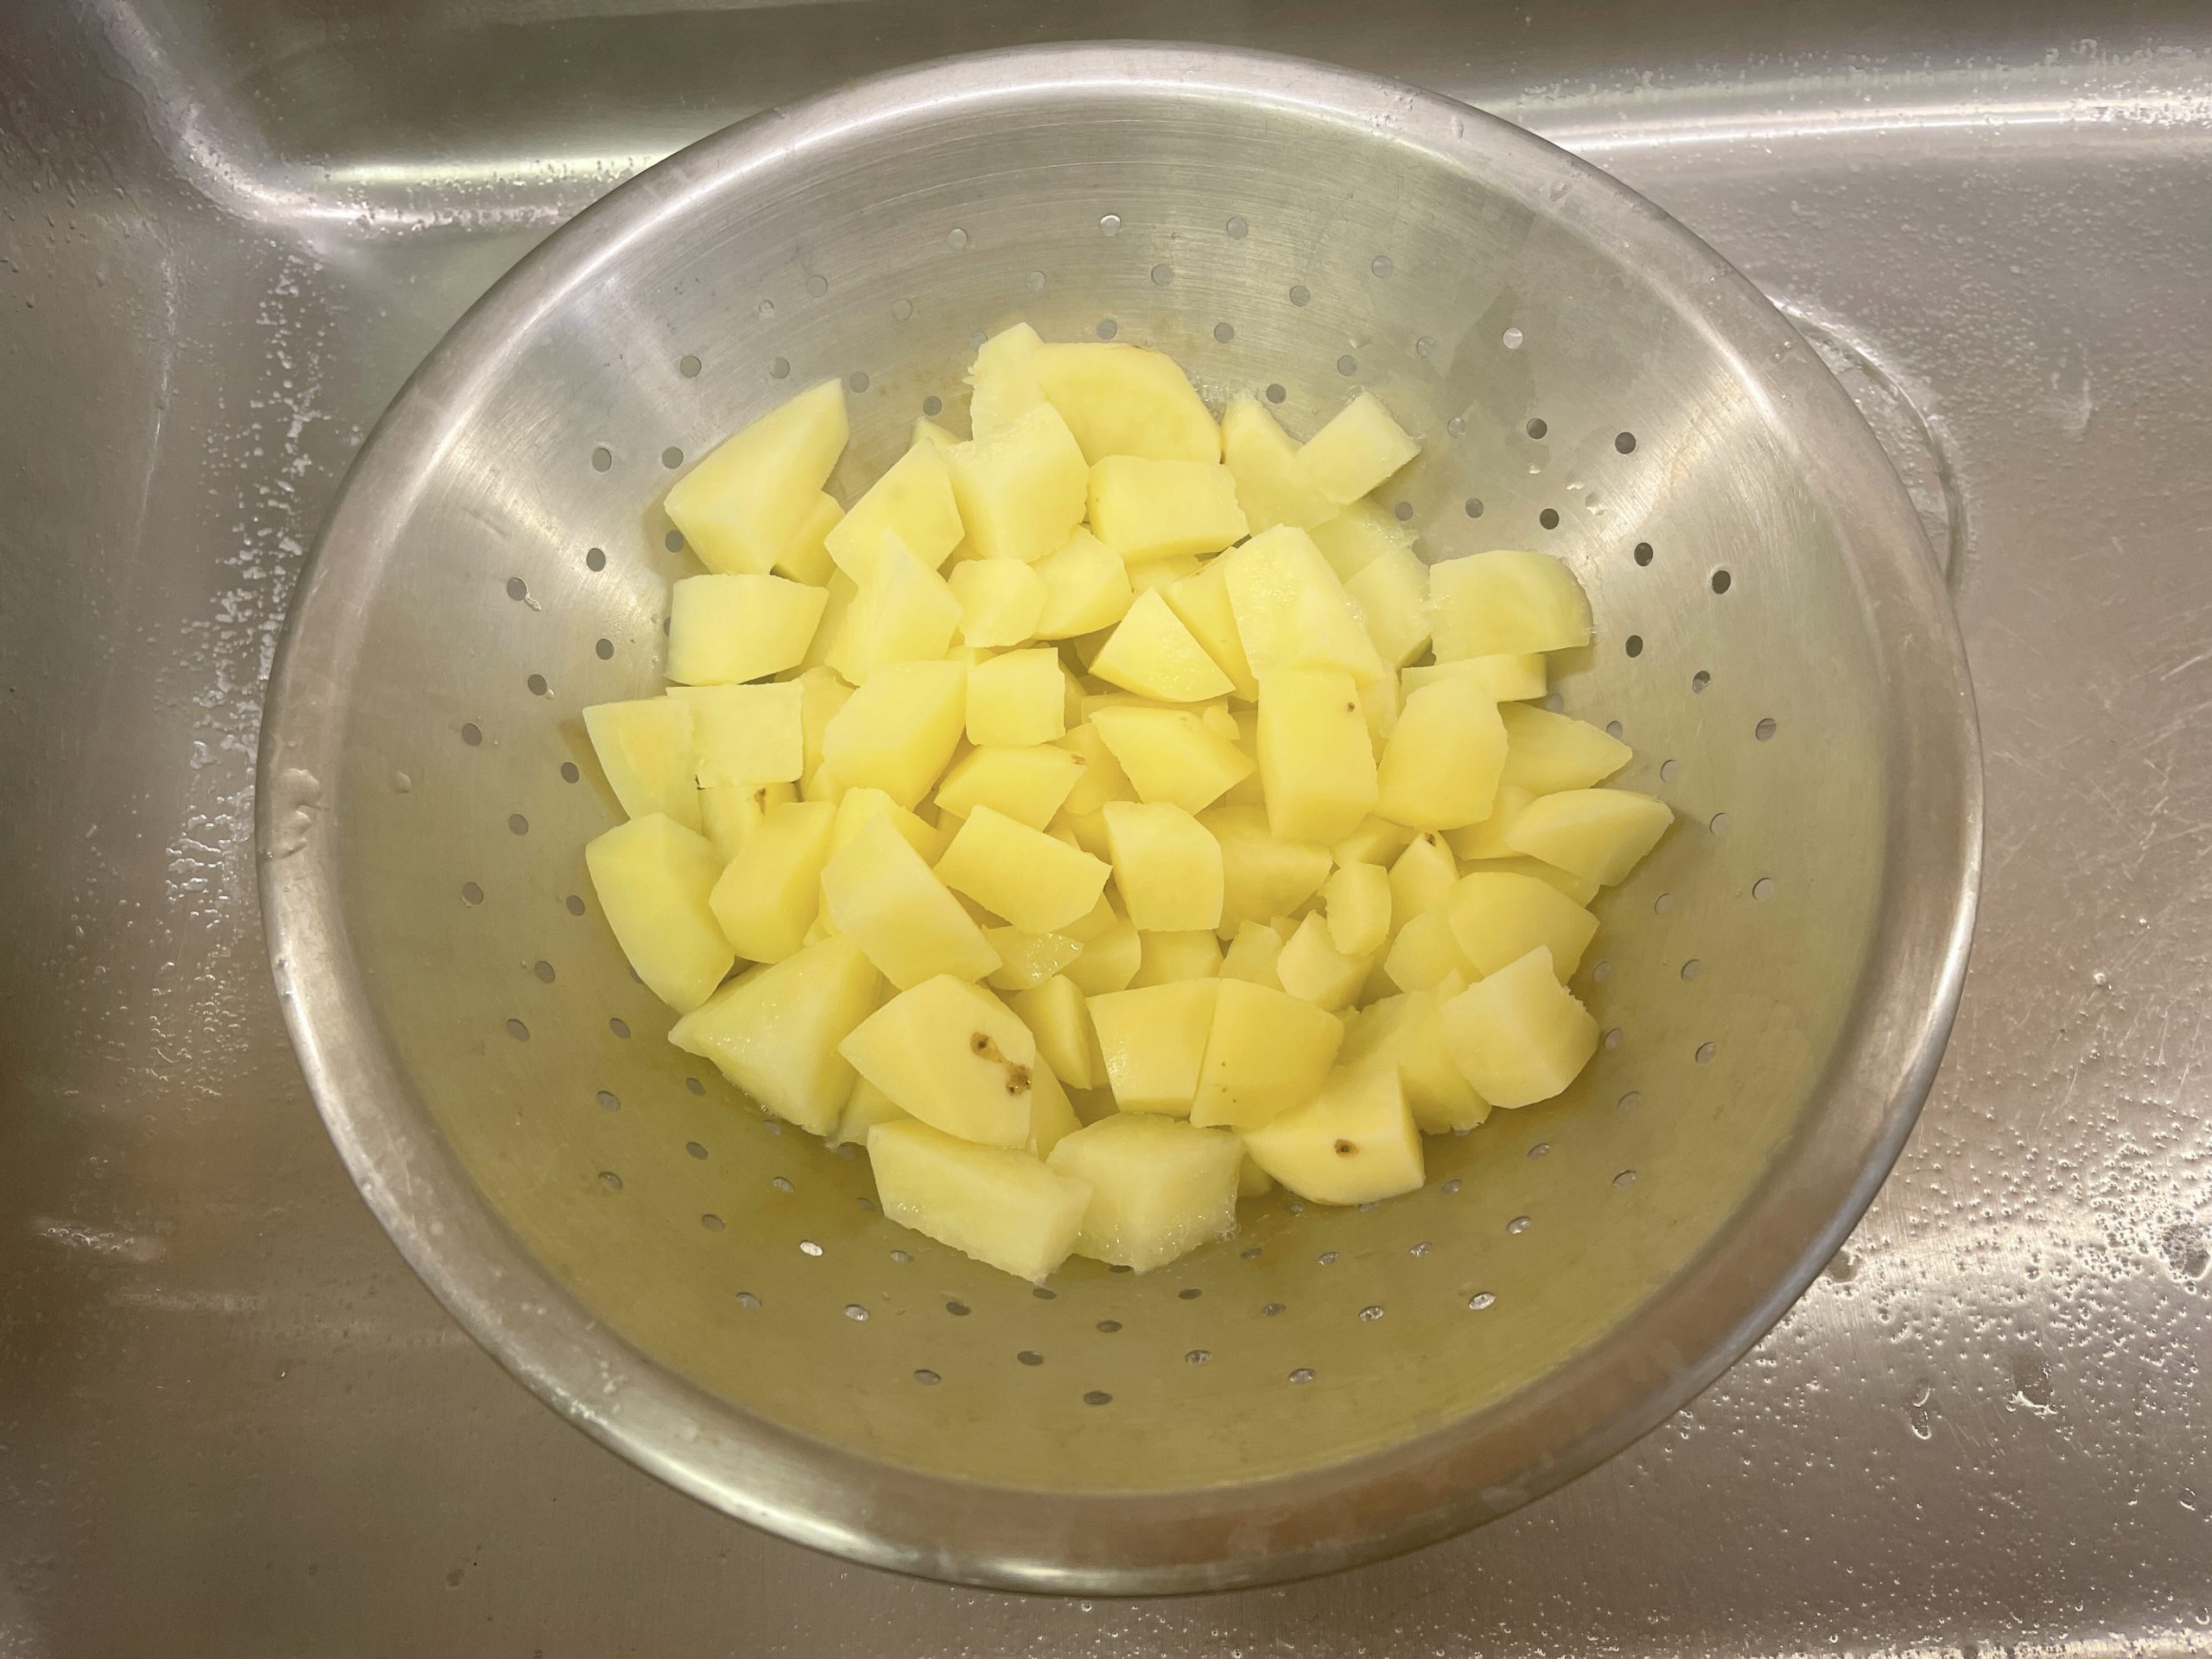 drained cooked potatoes in a colander